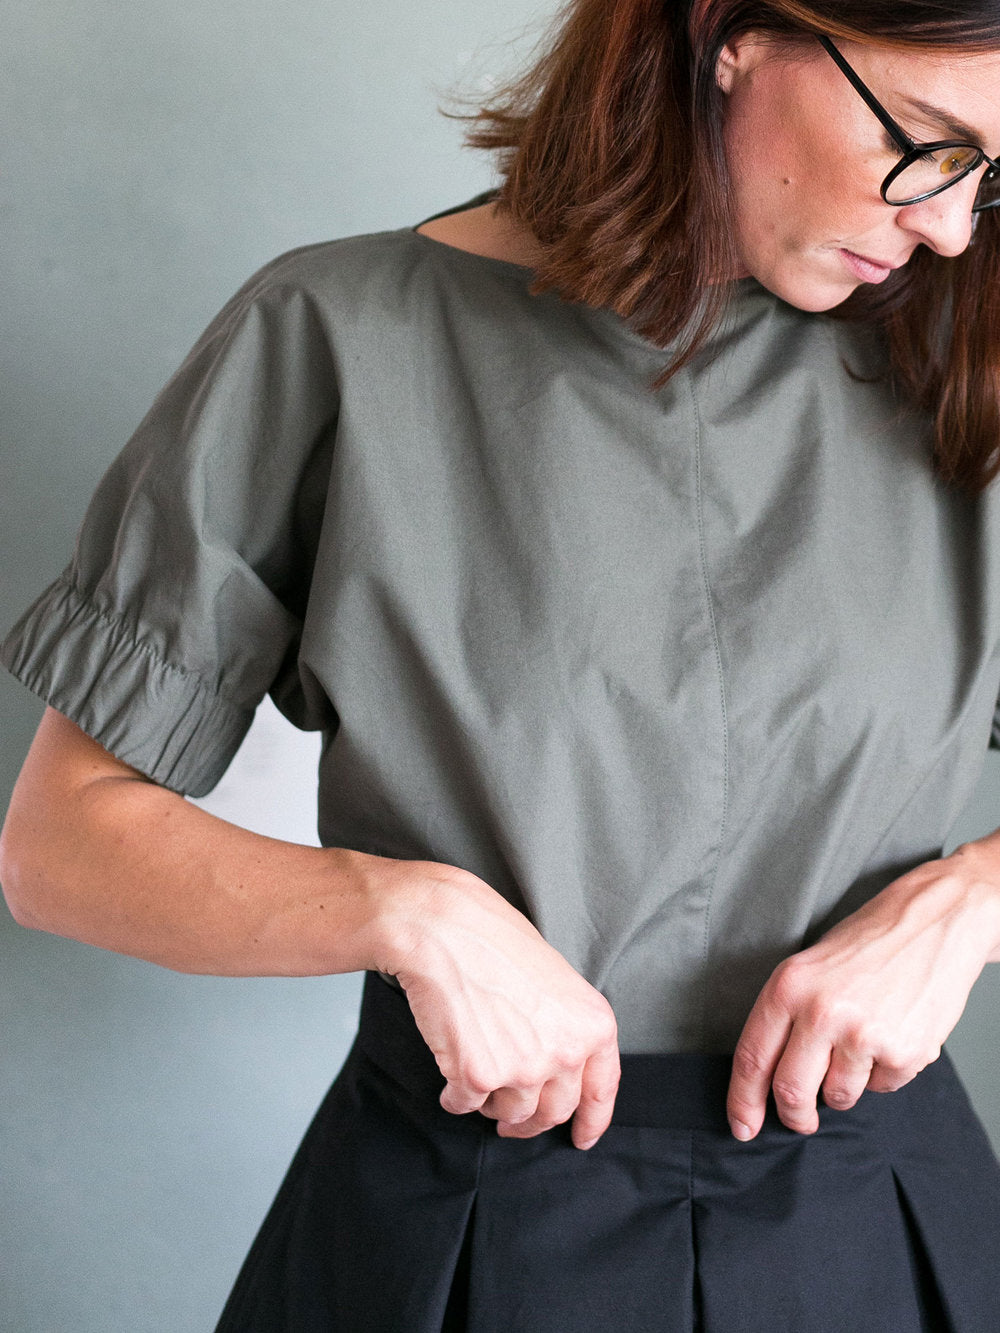 The Assembly Line Cuff Top